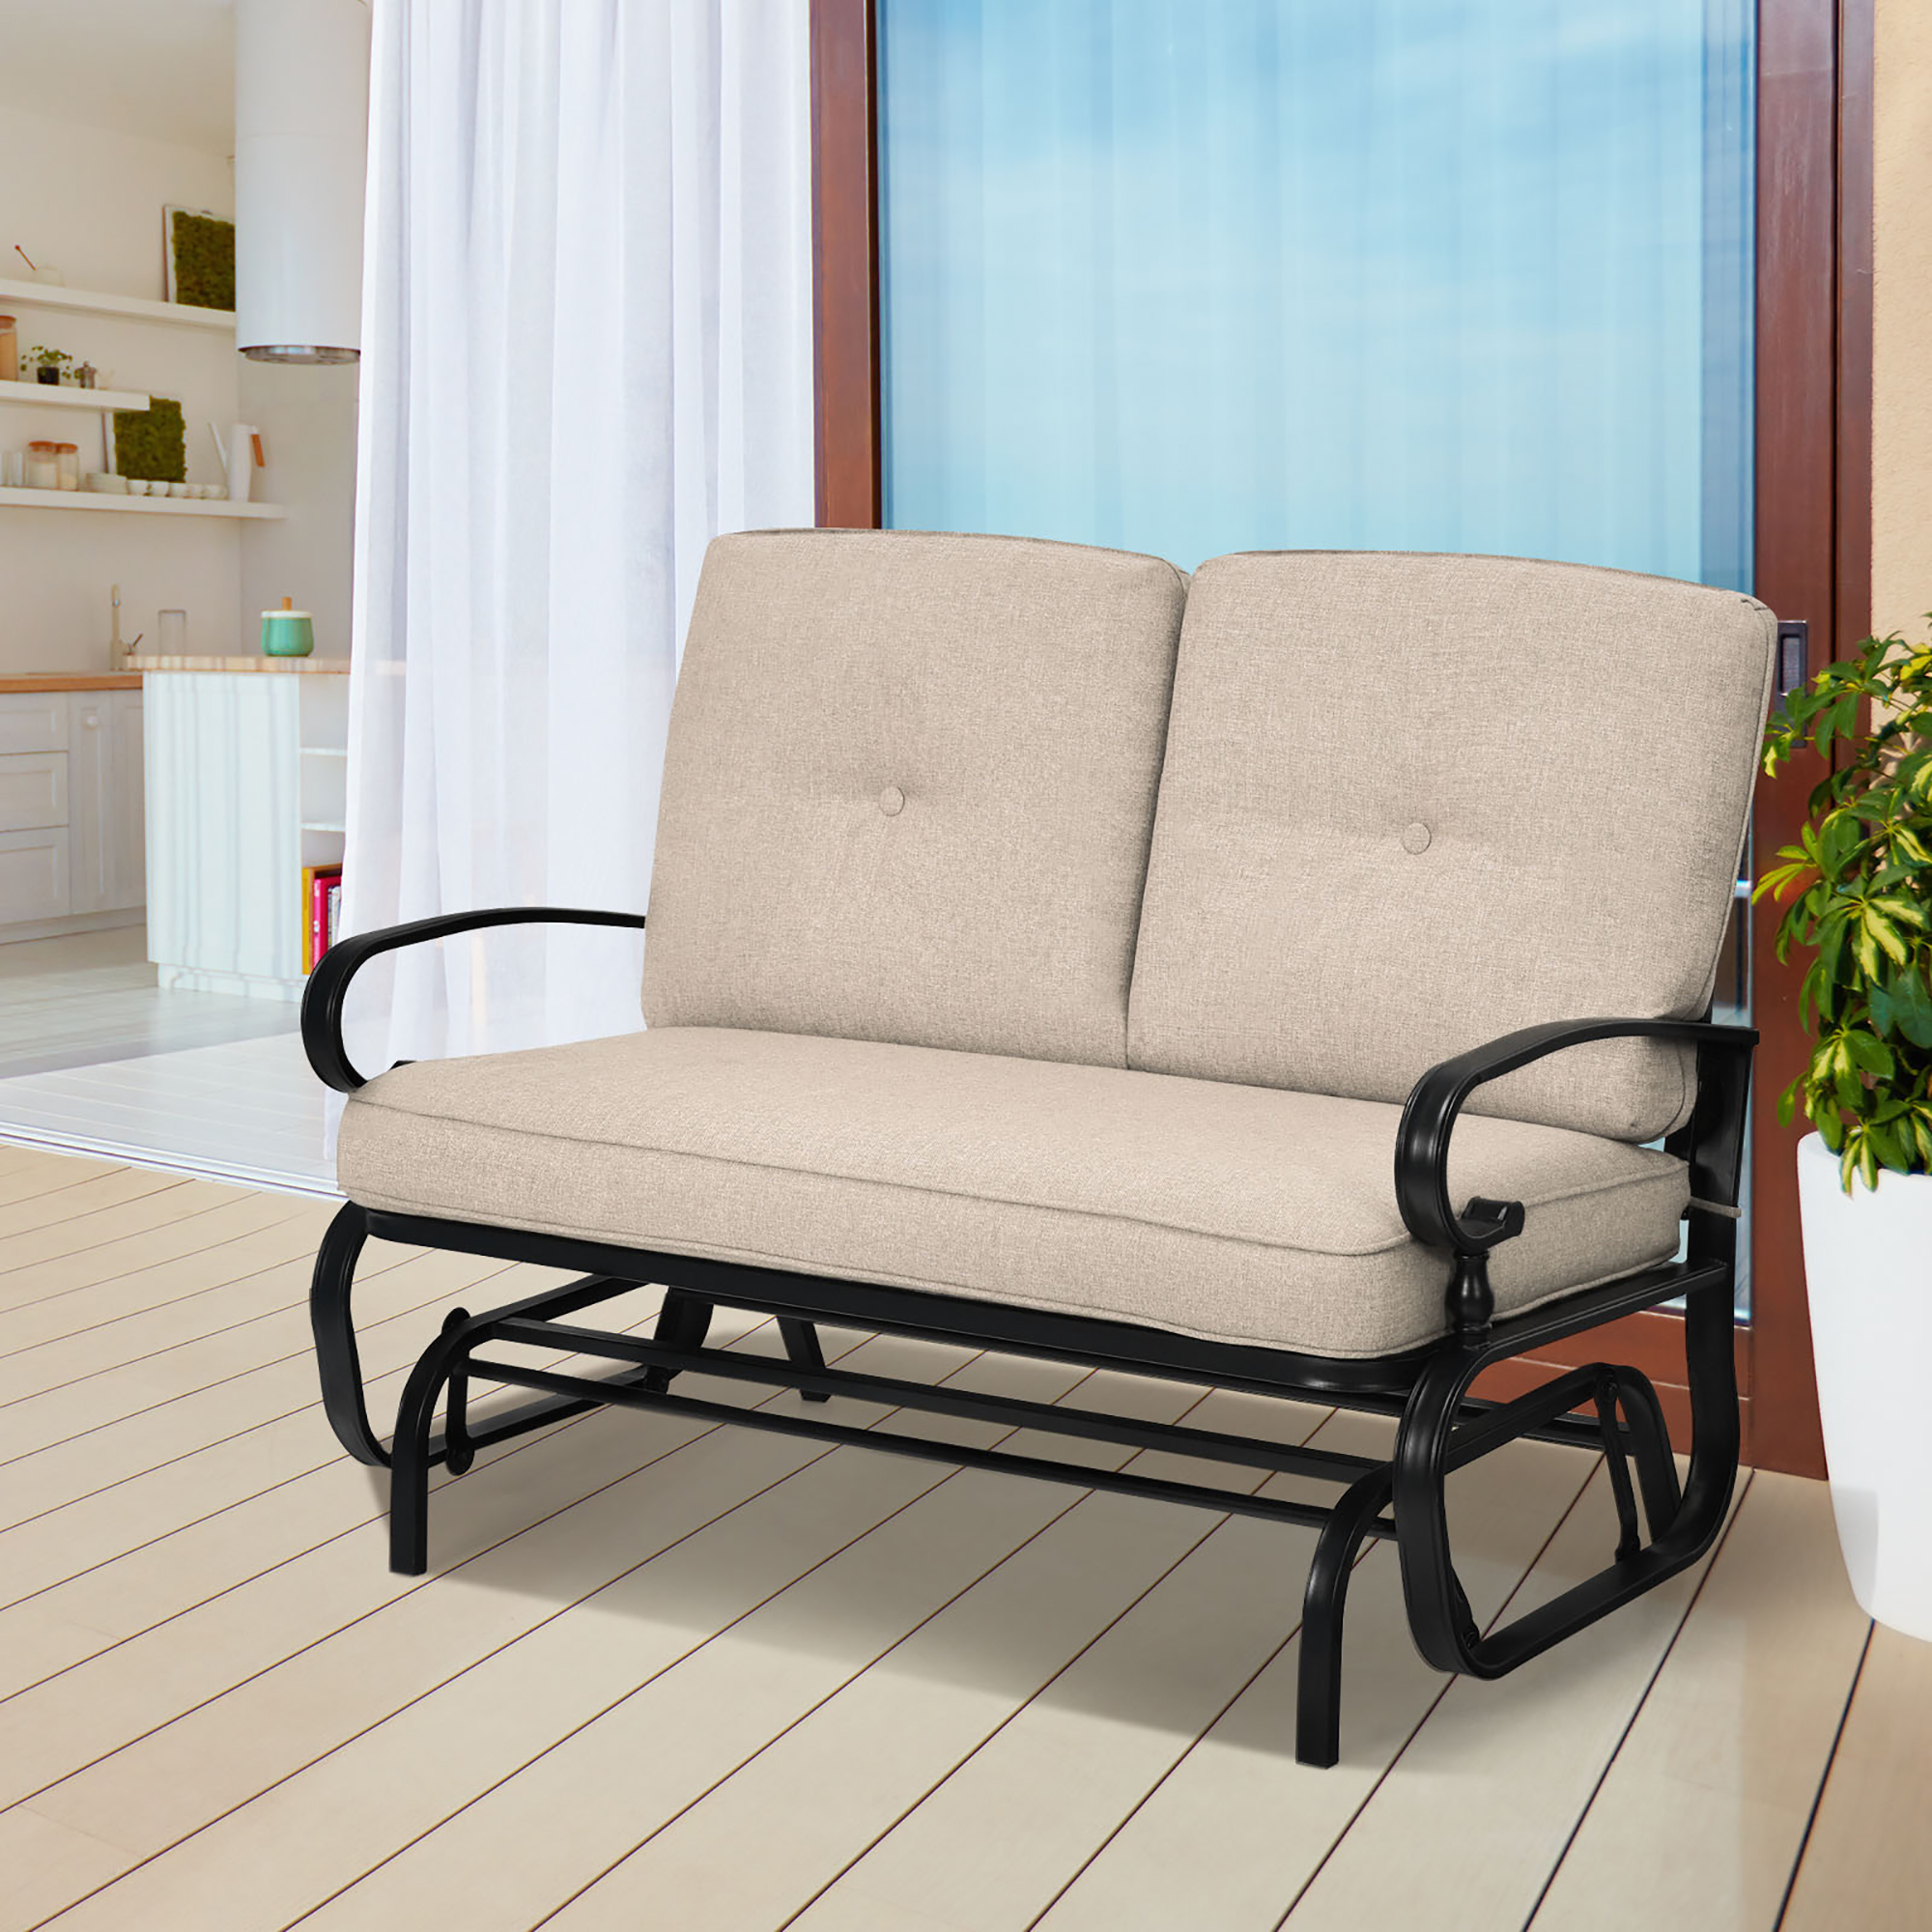 Costway 2-Person Outdoor Swing Glider Chair Bench Loveseat Cushioned Sofa - image 2 of 10